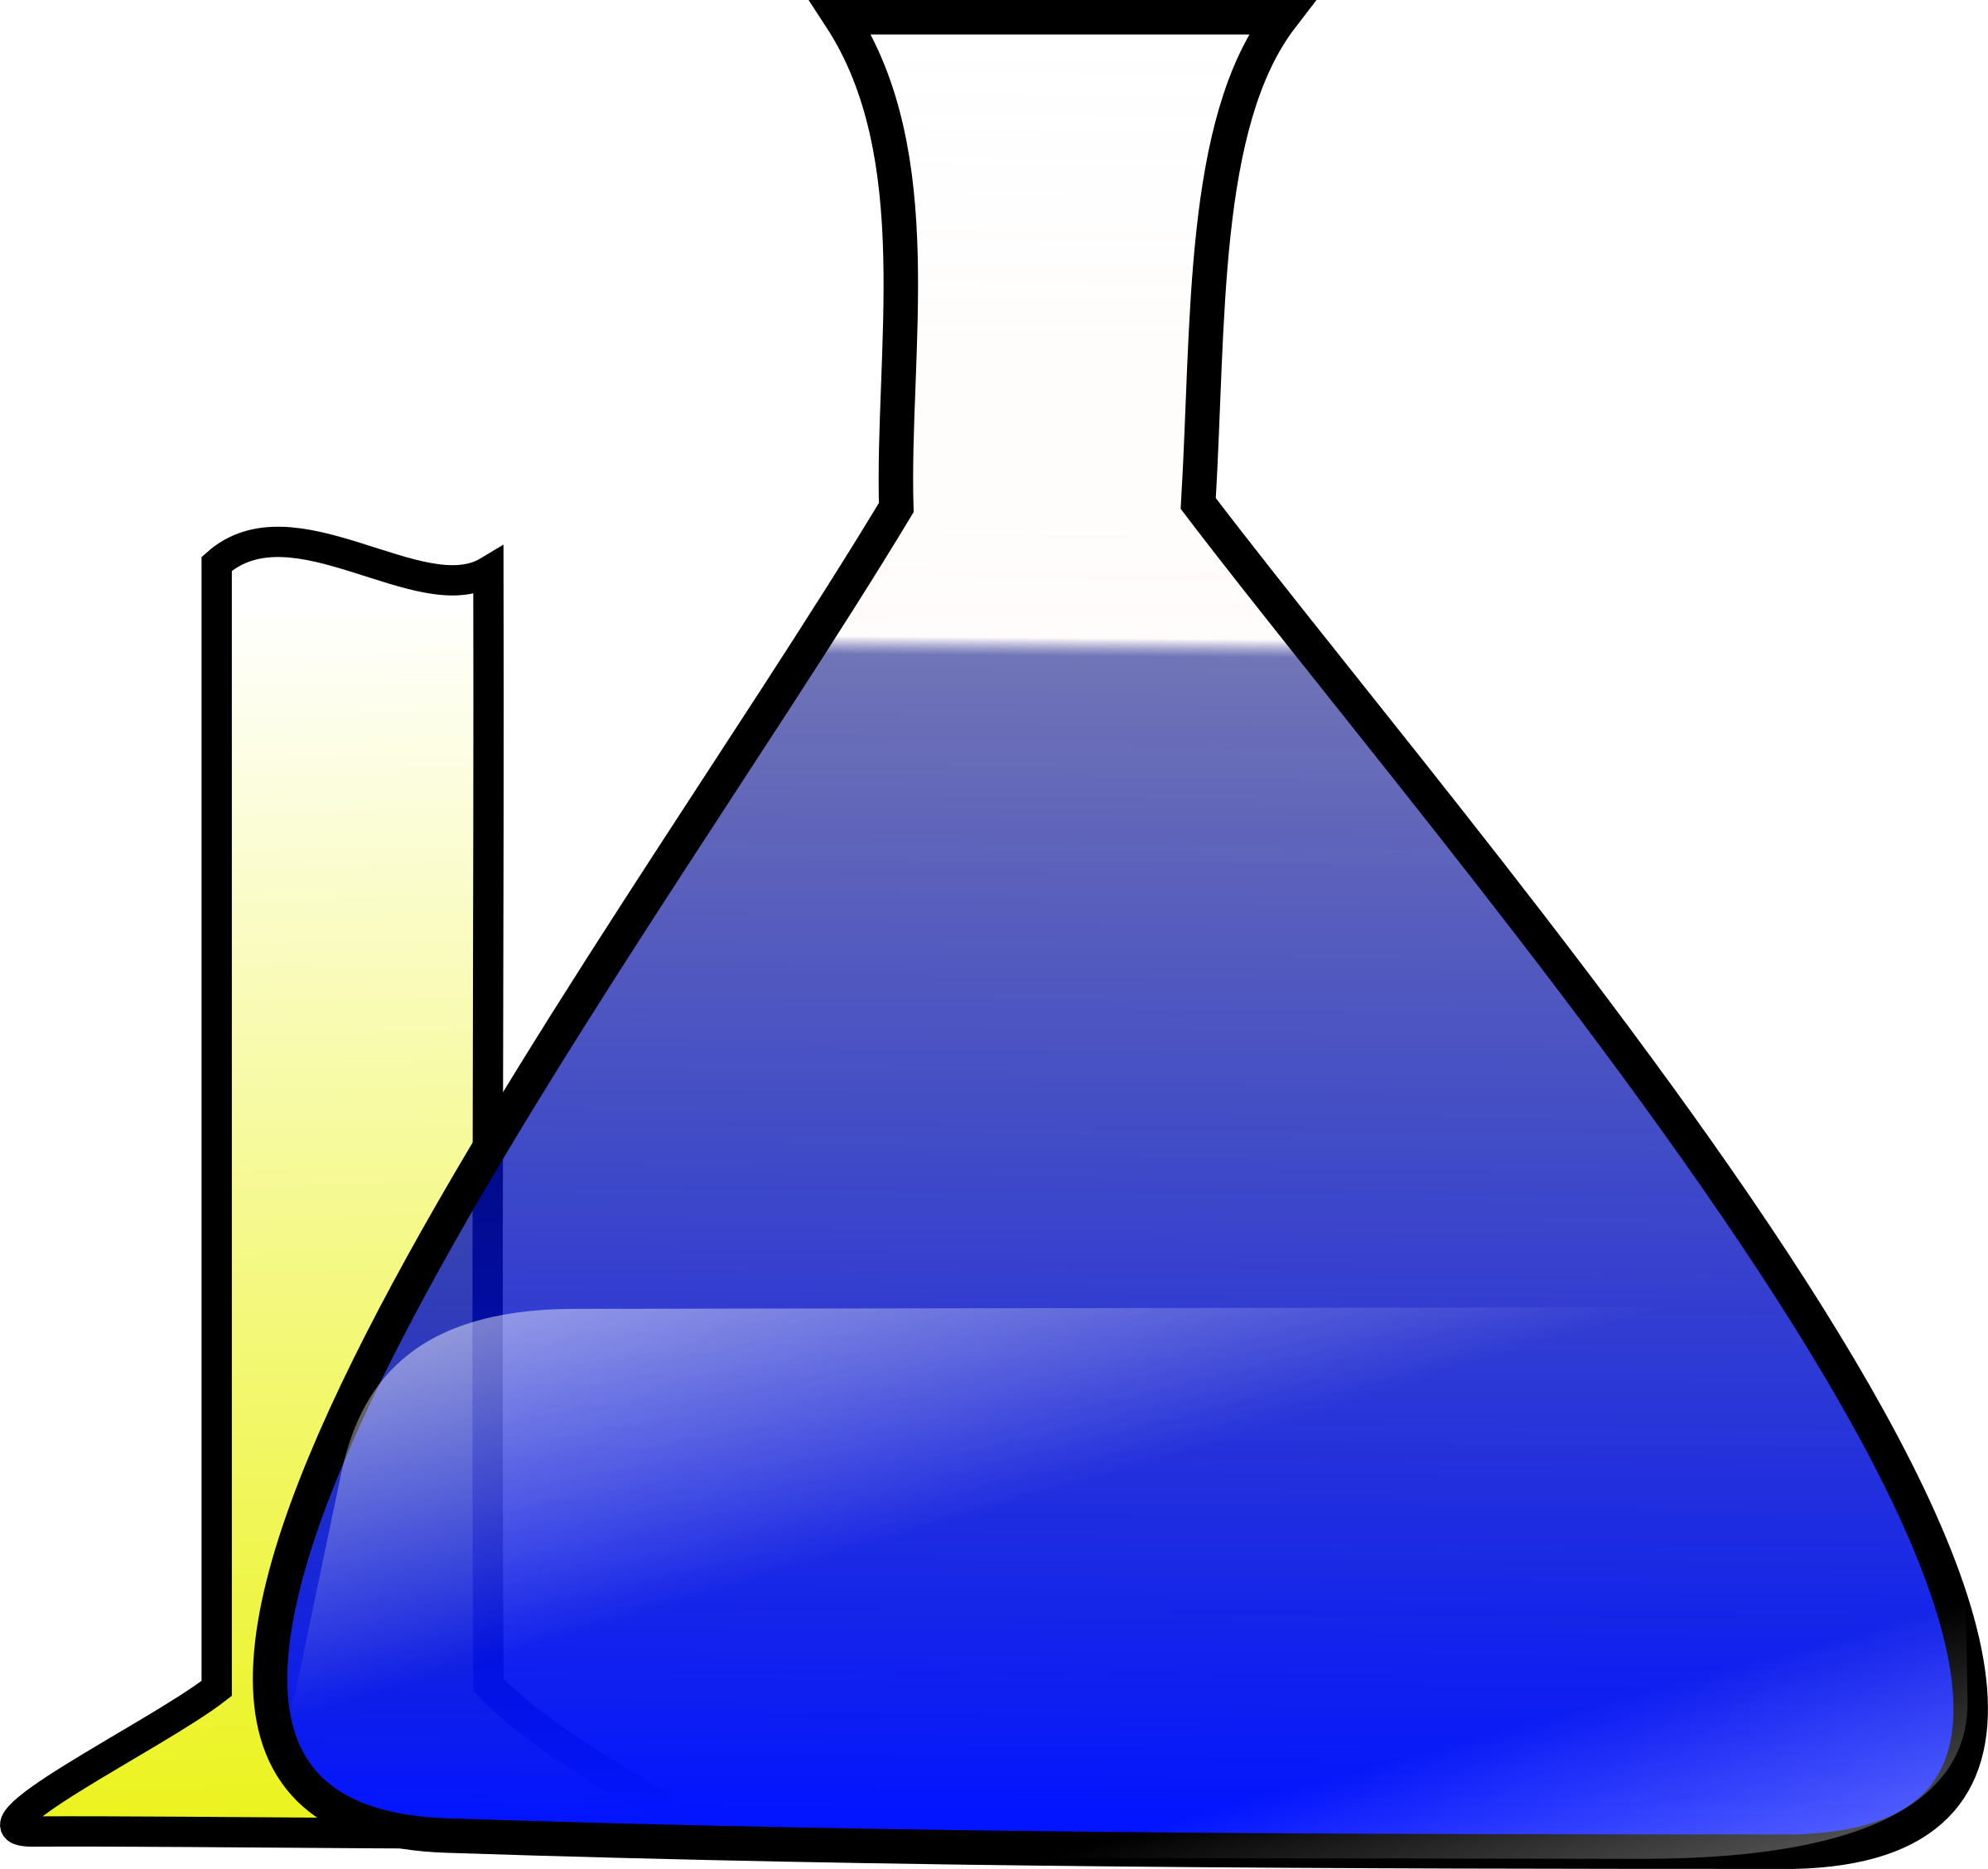 Big Image (Png) - Science Experiment, Transparent background PNG HD thumbnail